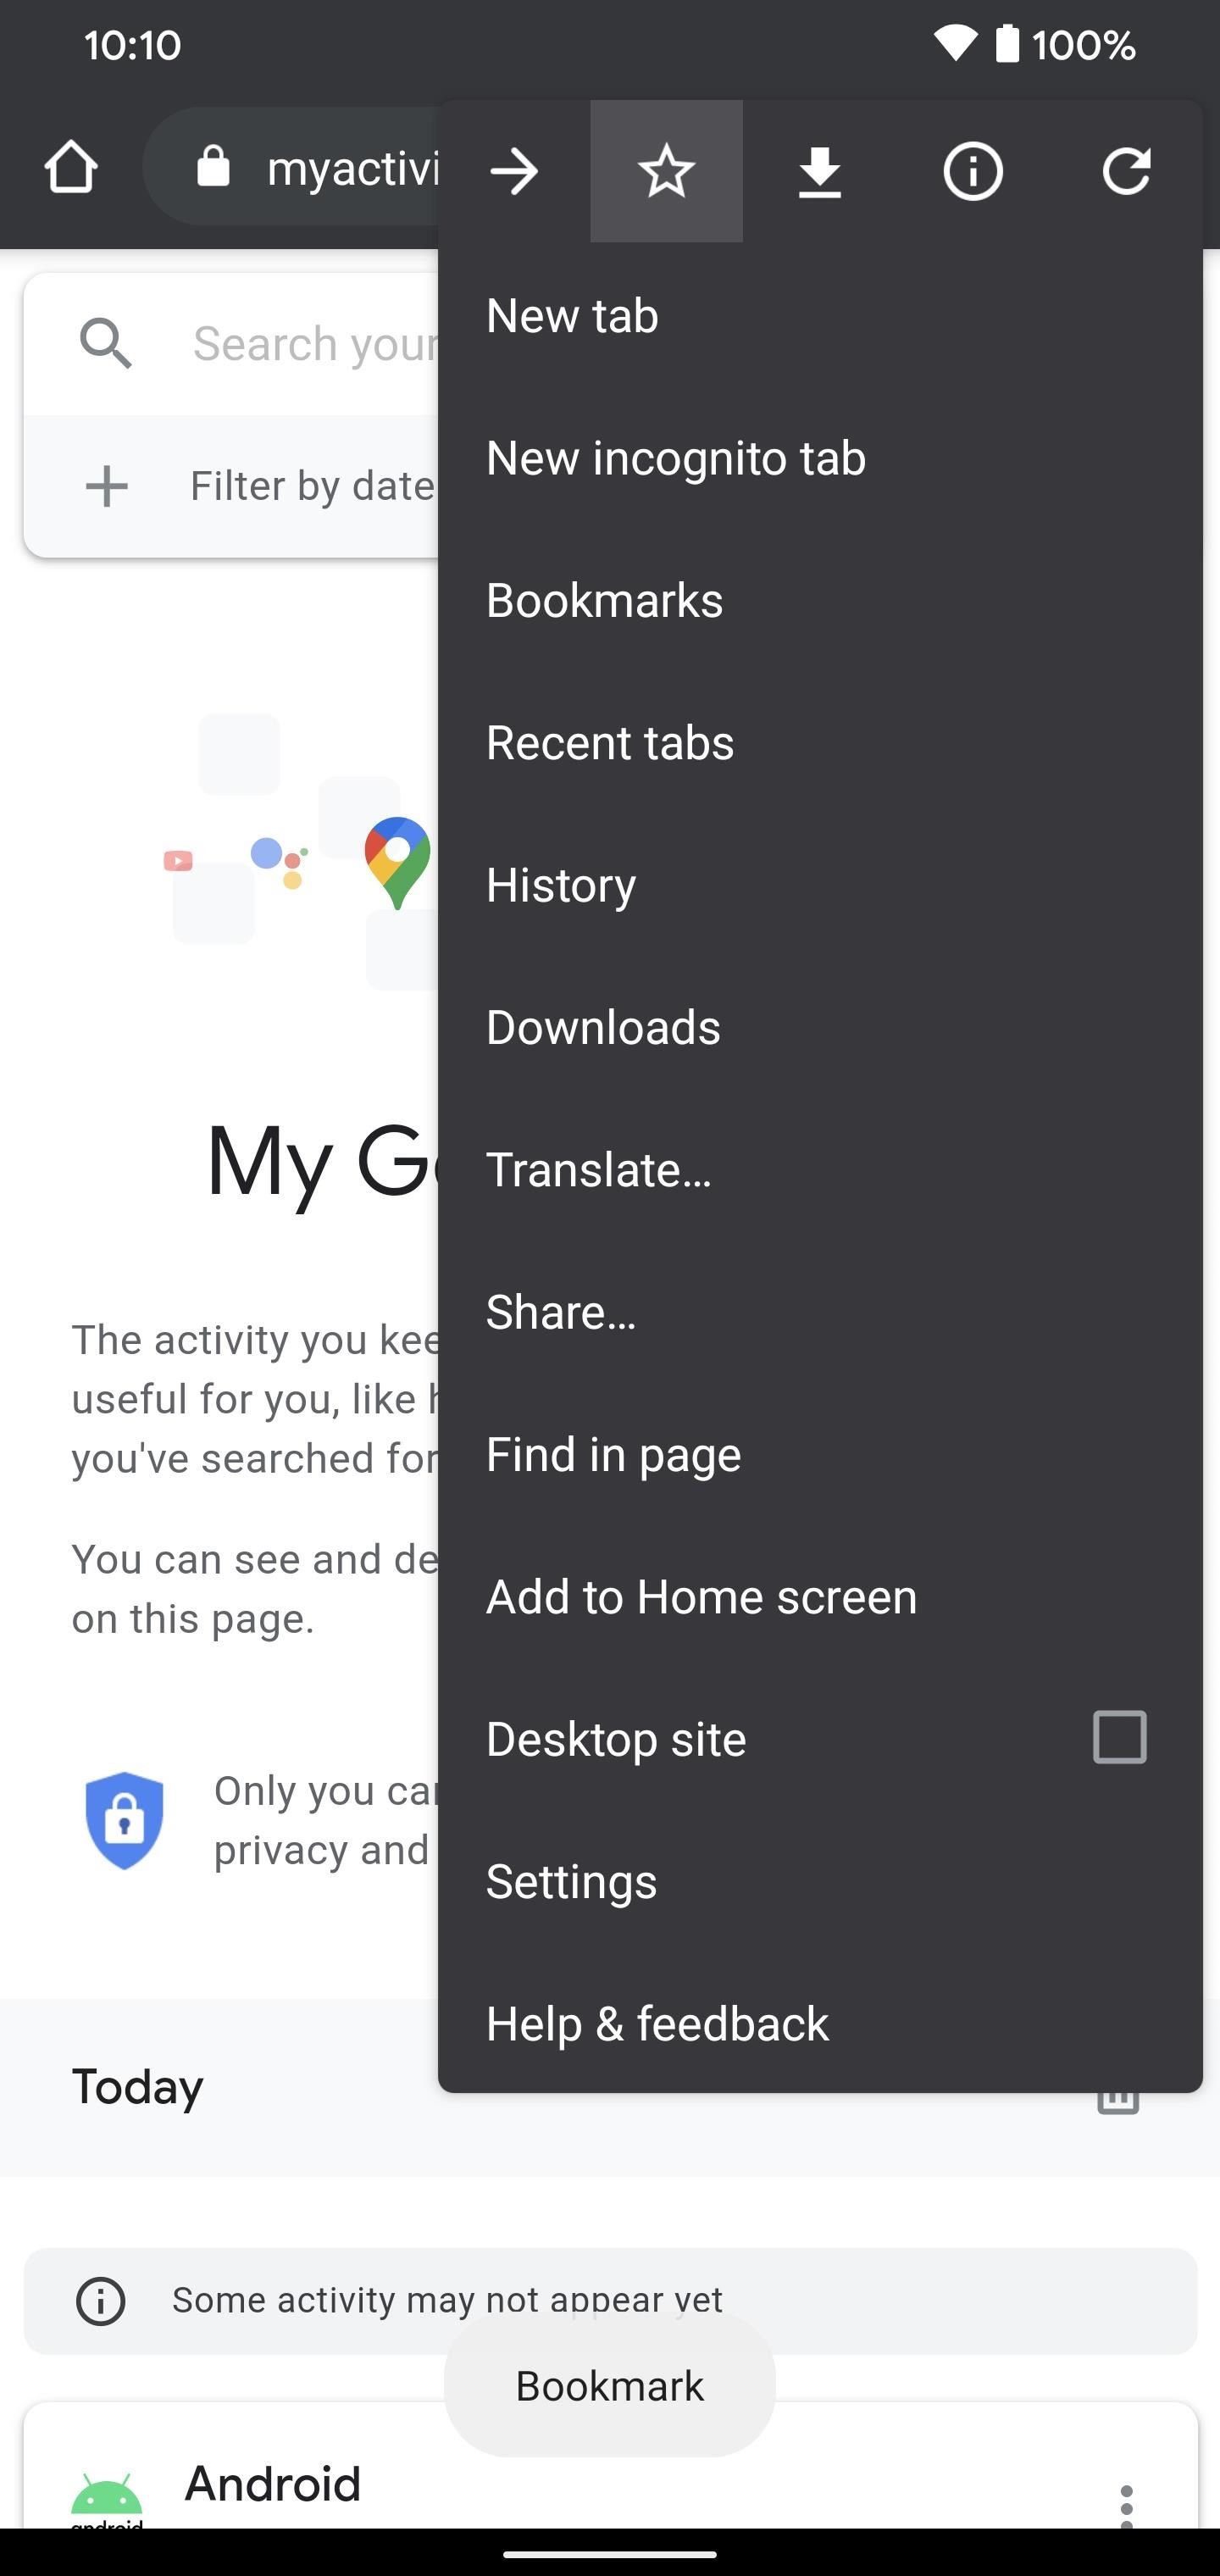 How to Make a Panic Button That Deletes All Your Google History in Seconds